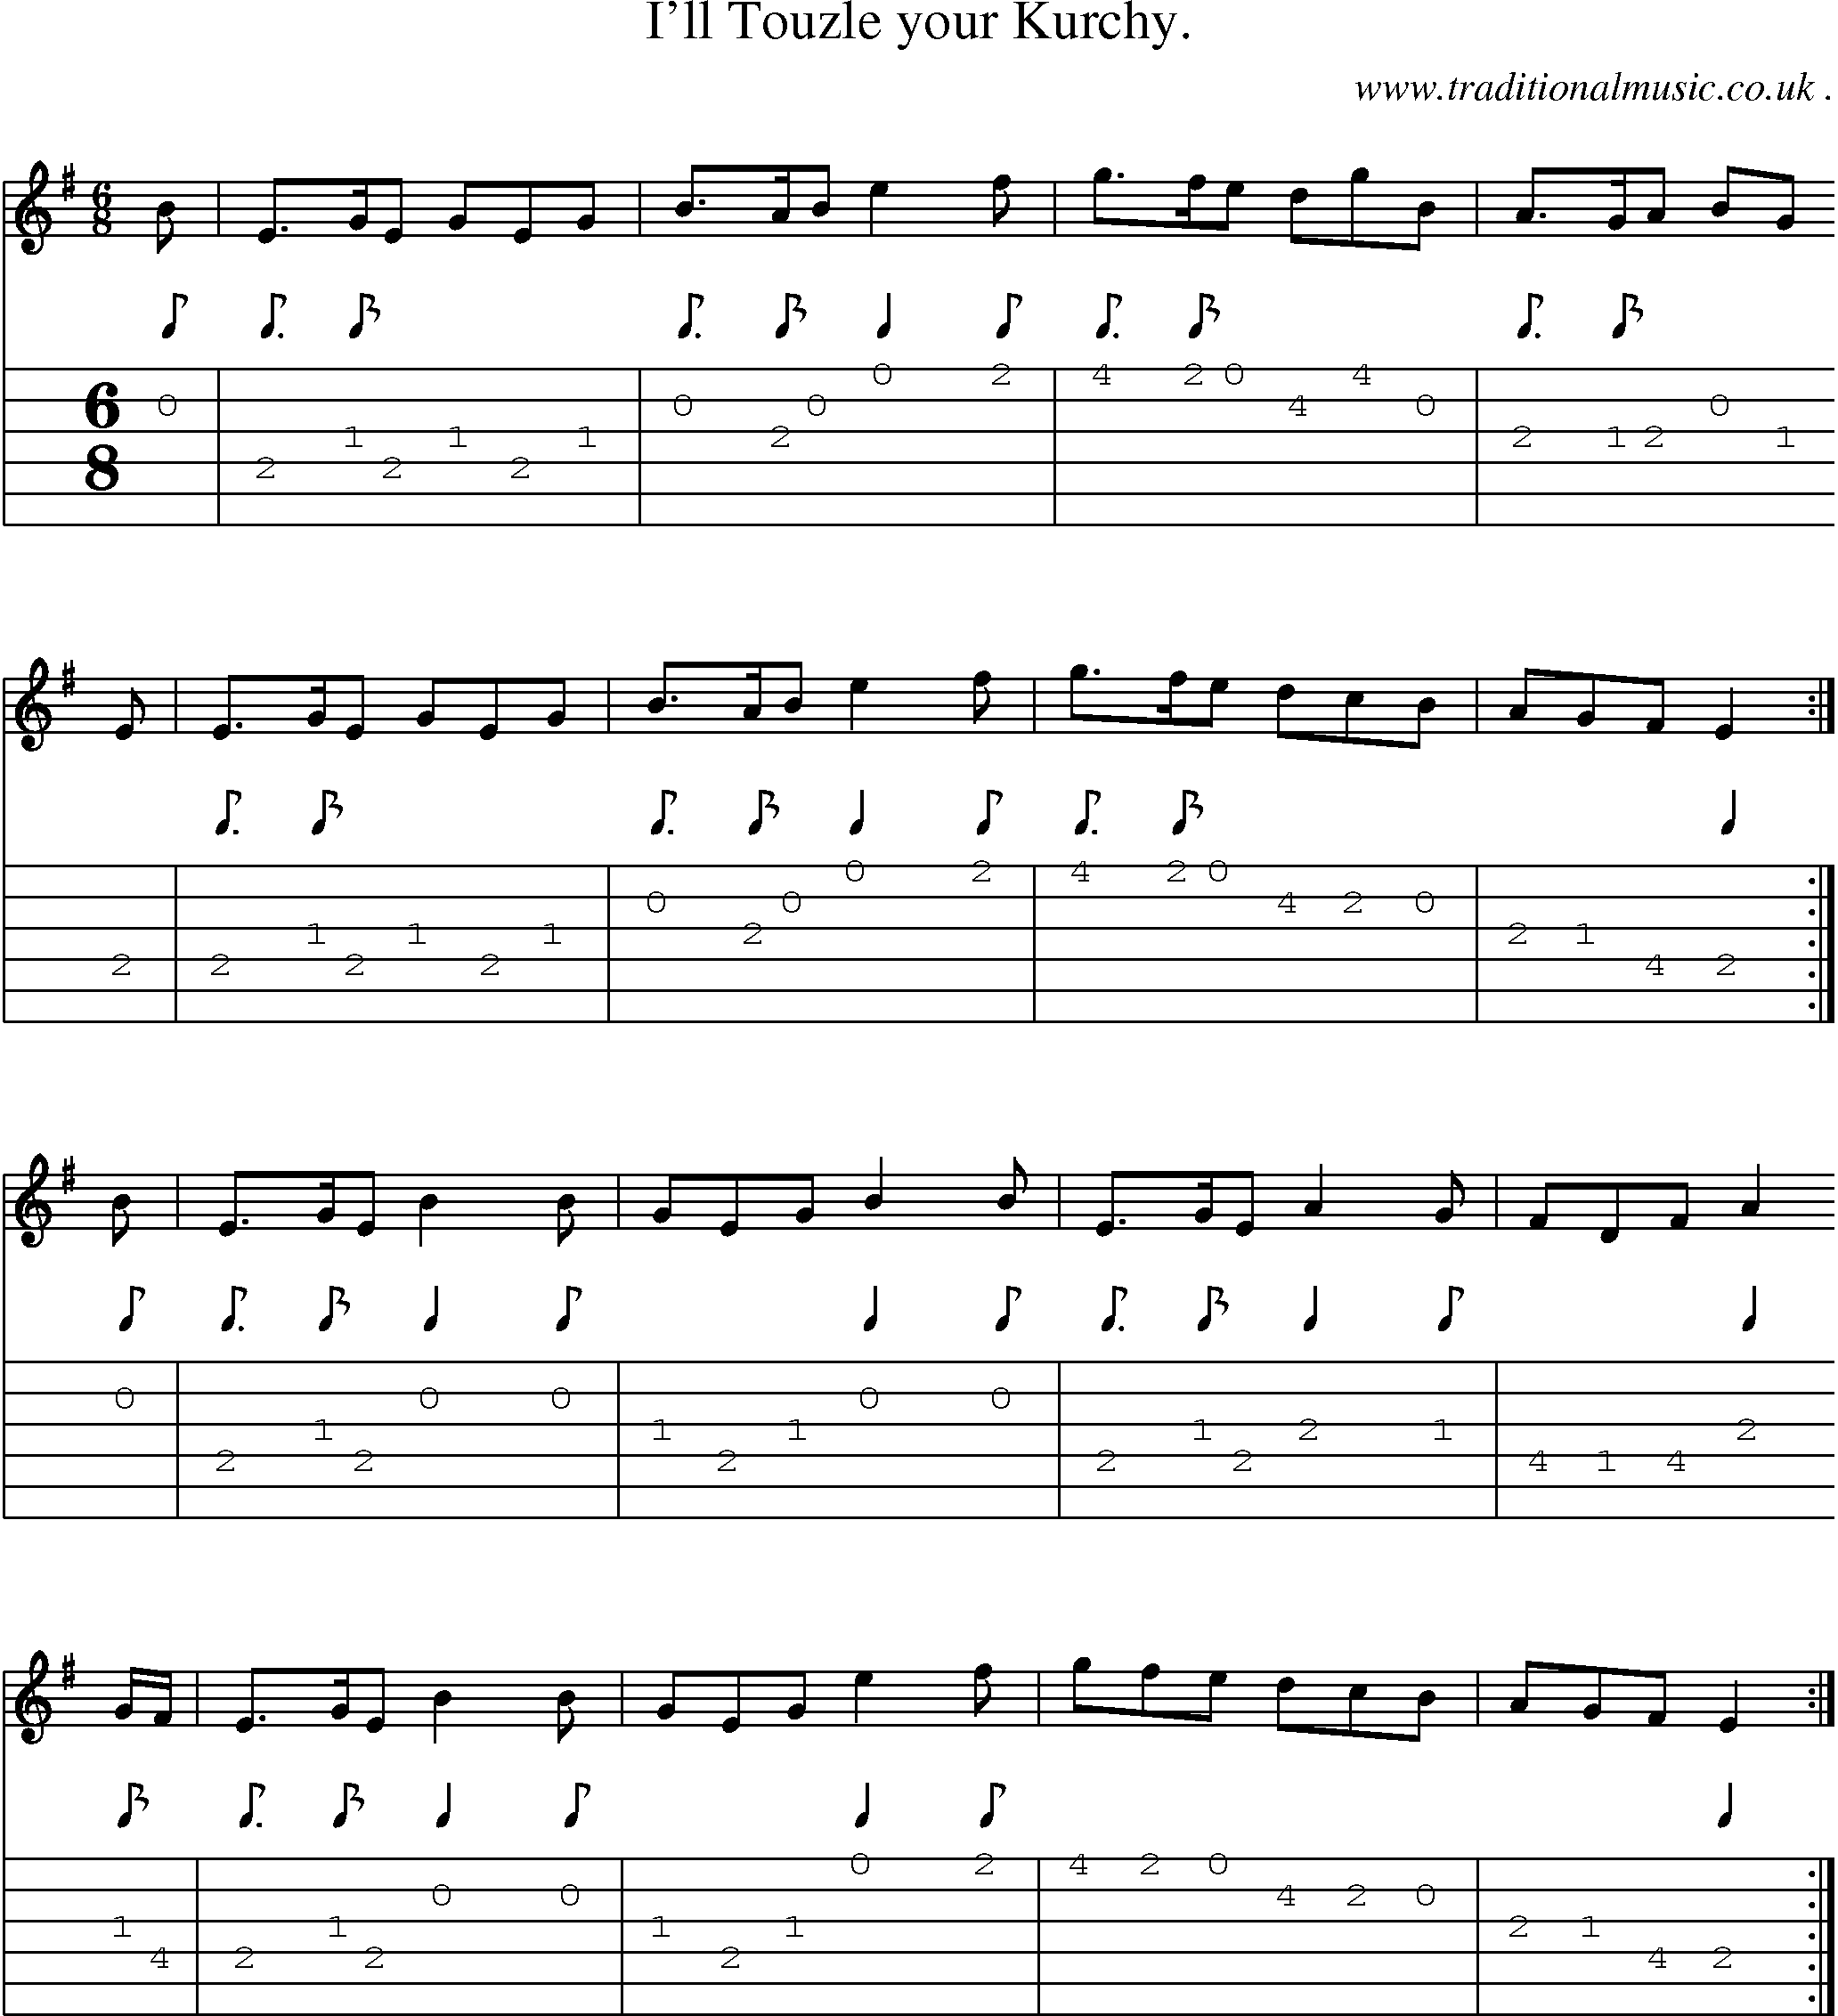 Sheet-Music and Guitar Tabs for Ill Touzle Your Kurchy